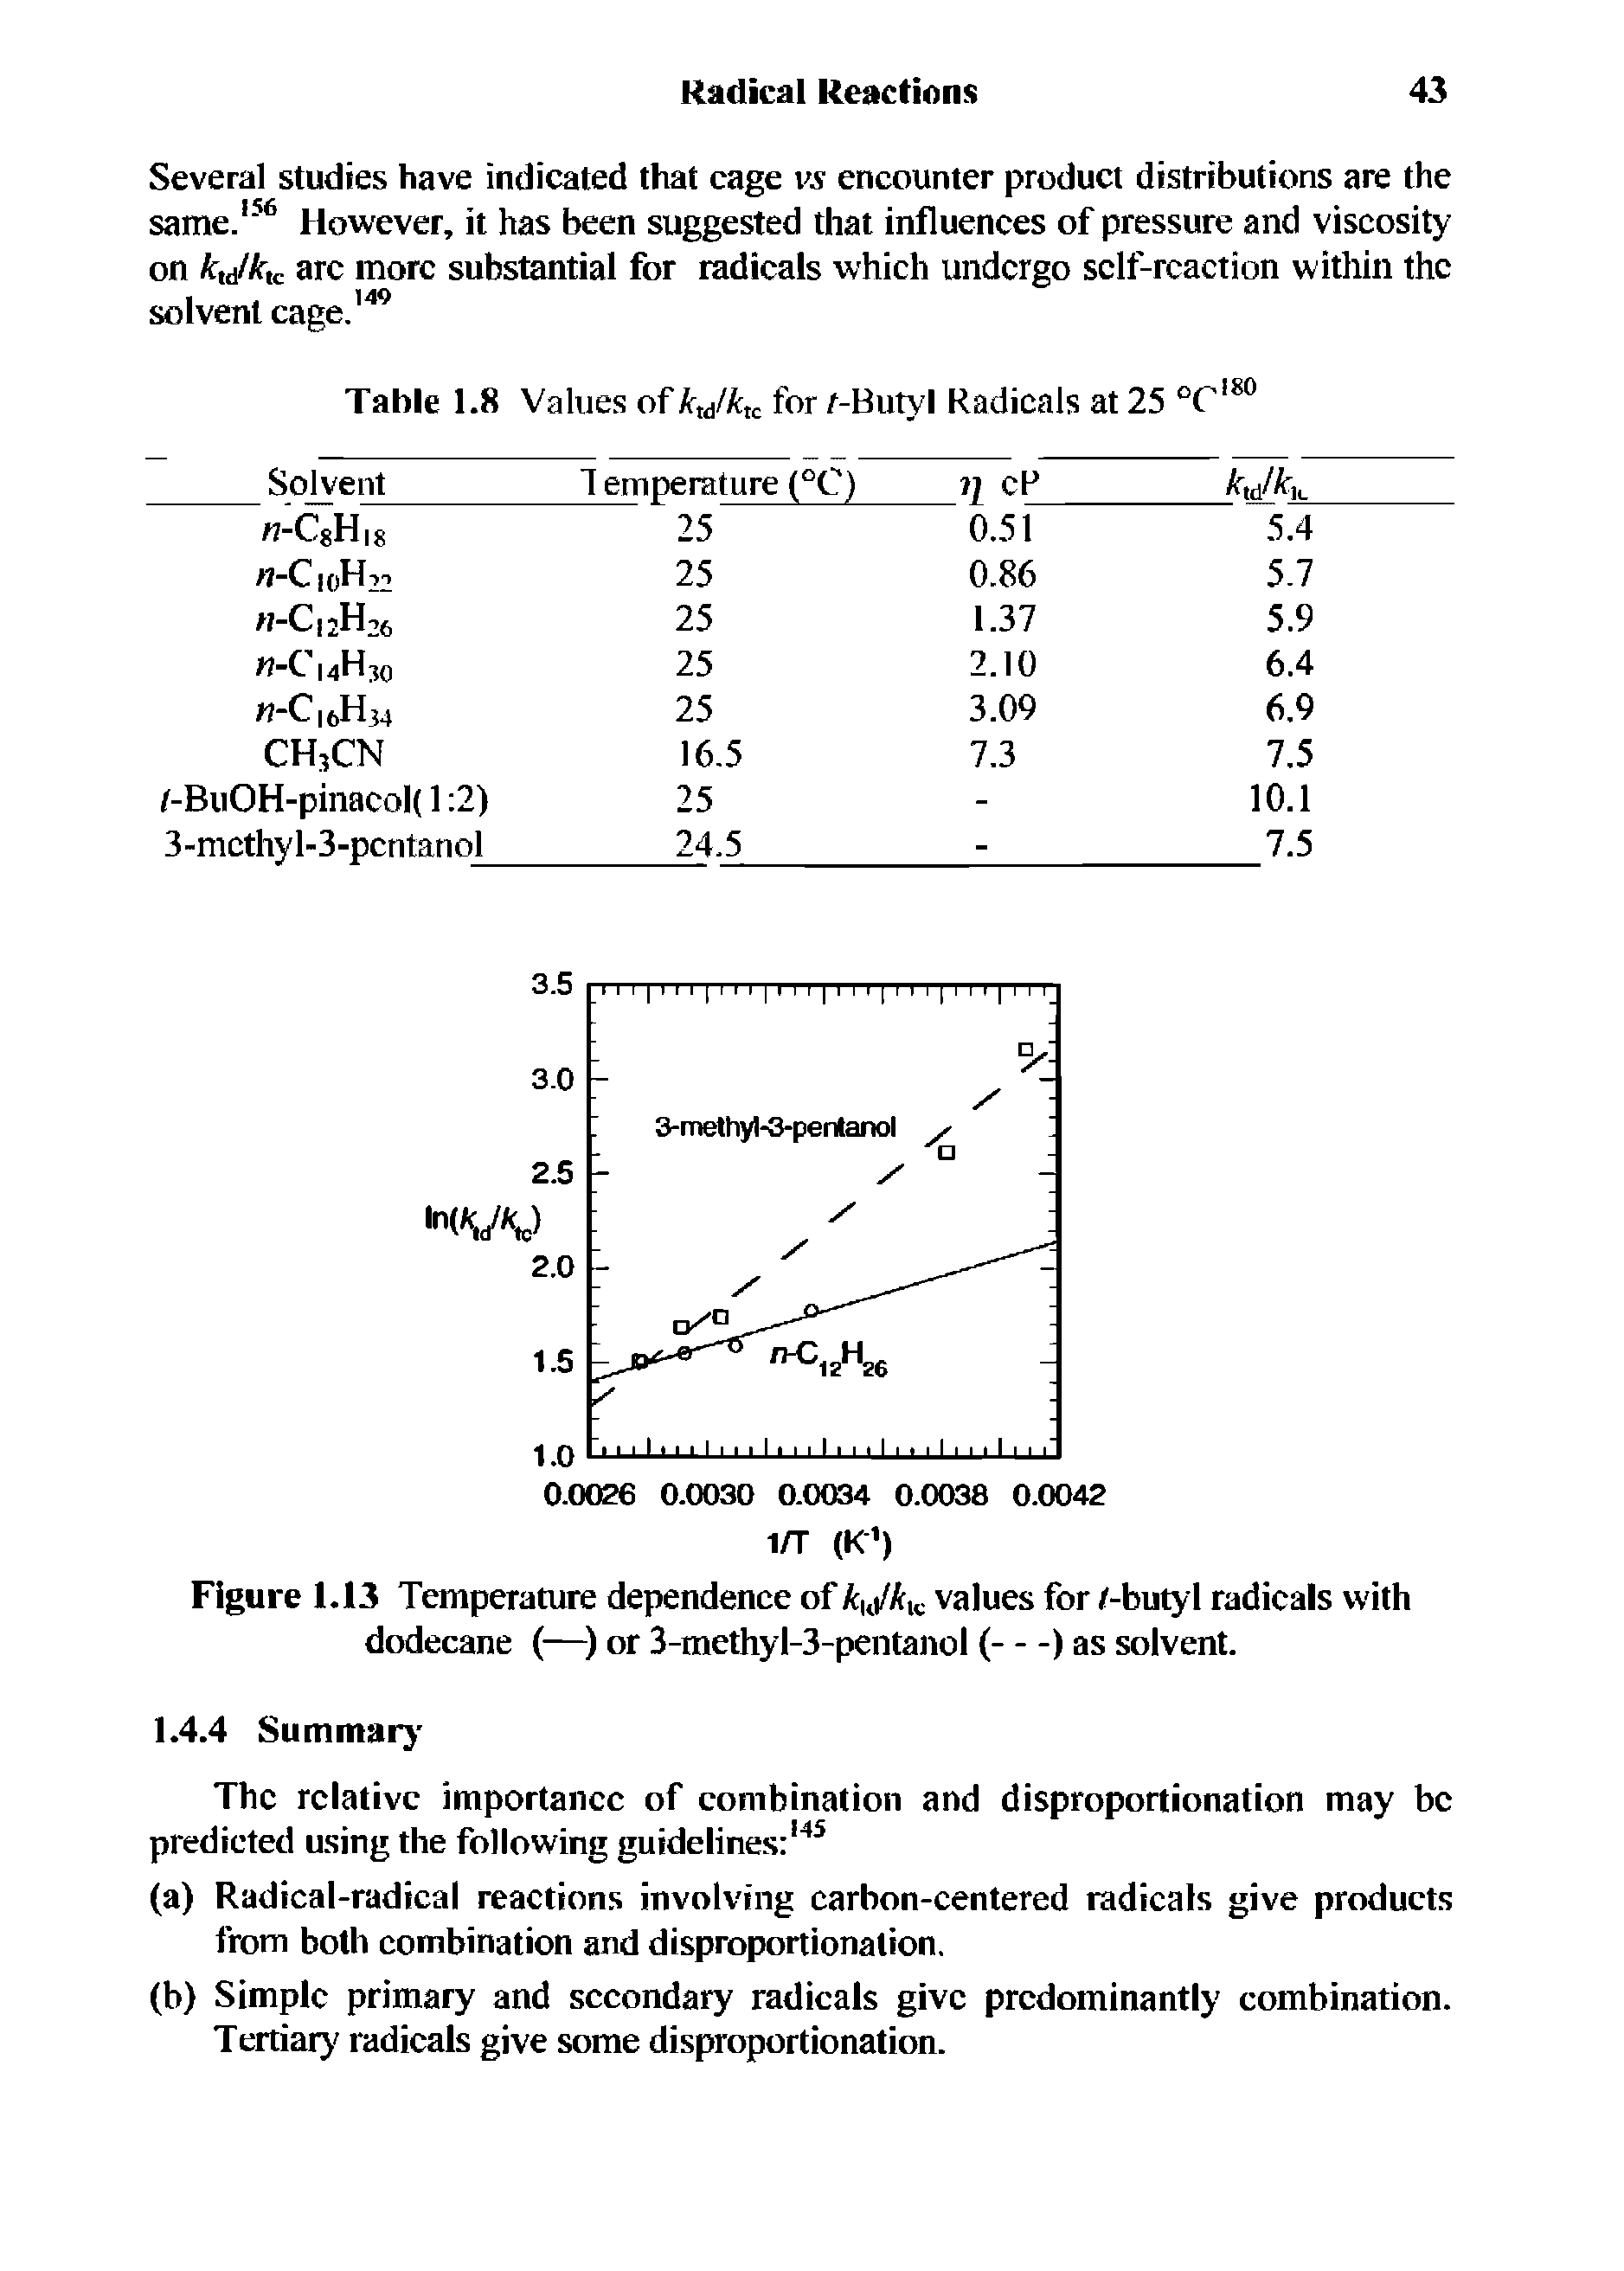 Figure 1.13 Temperature dependence of A U /Alc values for /-butyl radicals with dodecane (—) or 3-methyl-3-pentanol (---------------) as solvent.